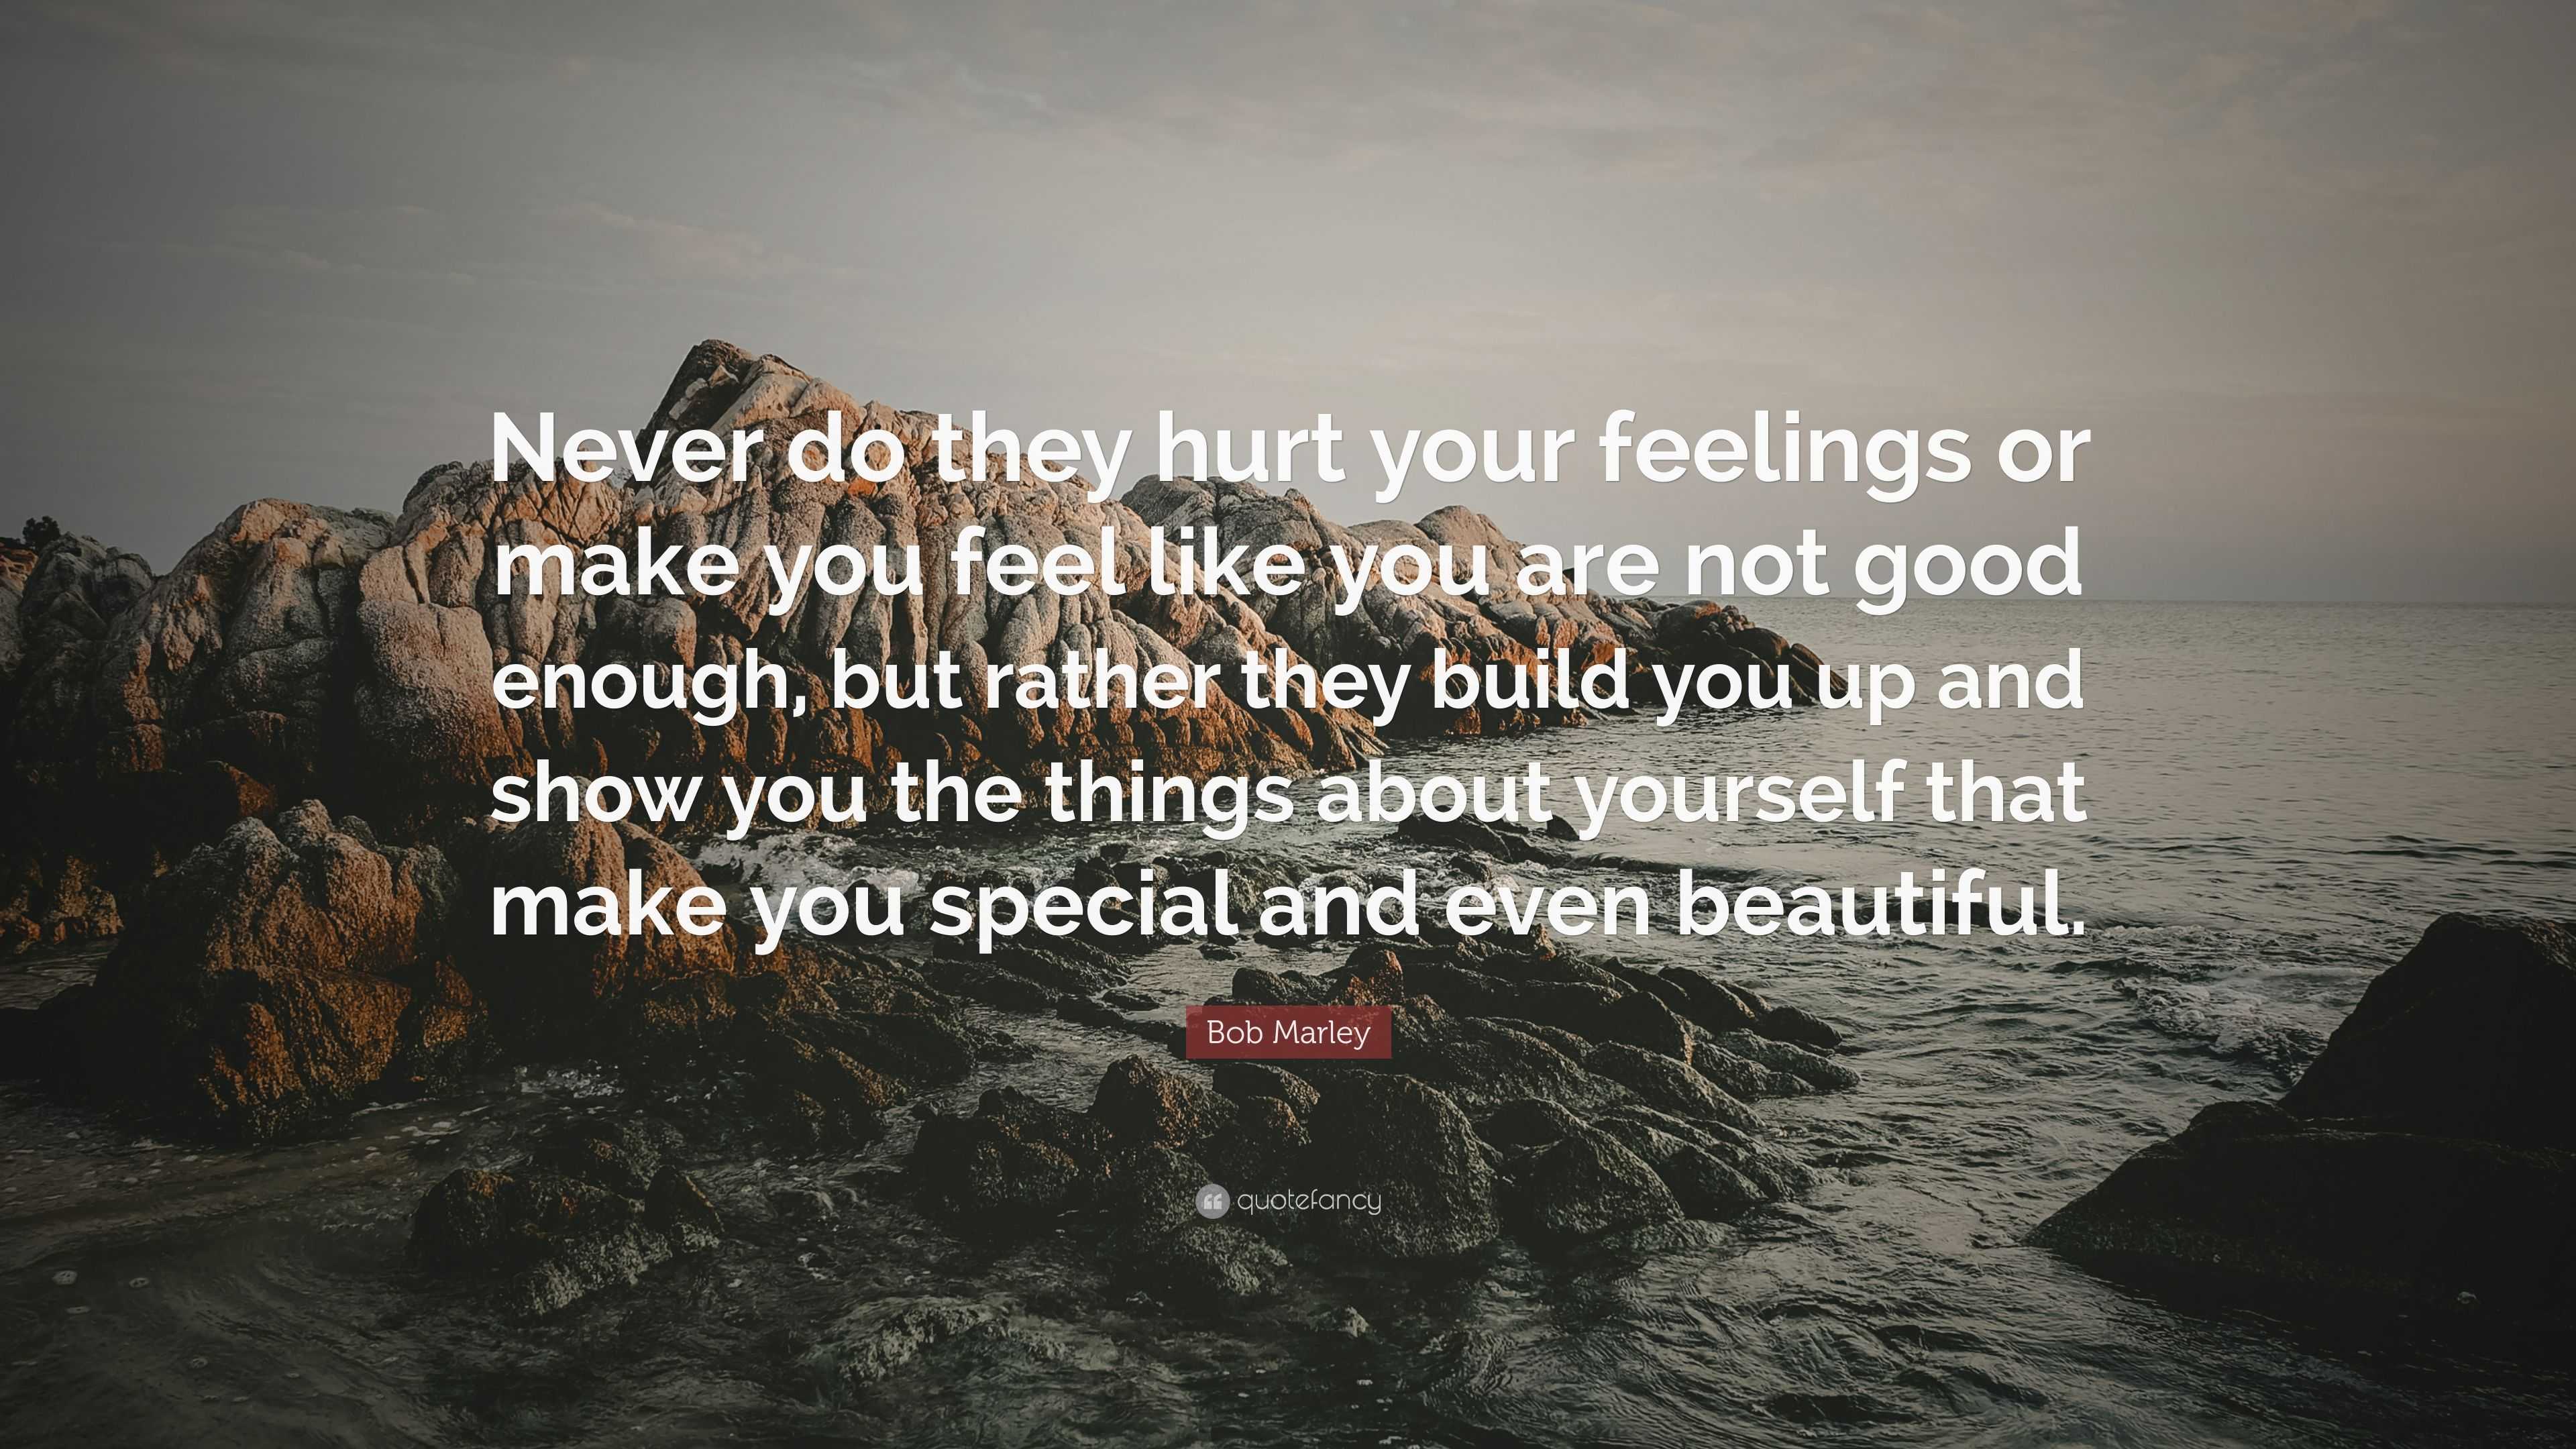 Bob Marley Quote Never Do They Hurt Your Feelings Or Make You Feel Like You Are Not Good Enough But Rather They Build You Up And Show Yo 6 Wallpapers Quotefancy